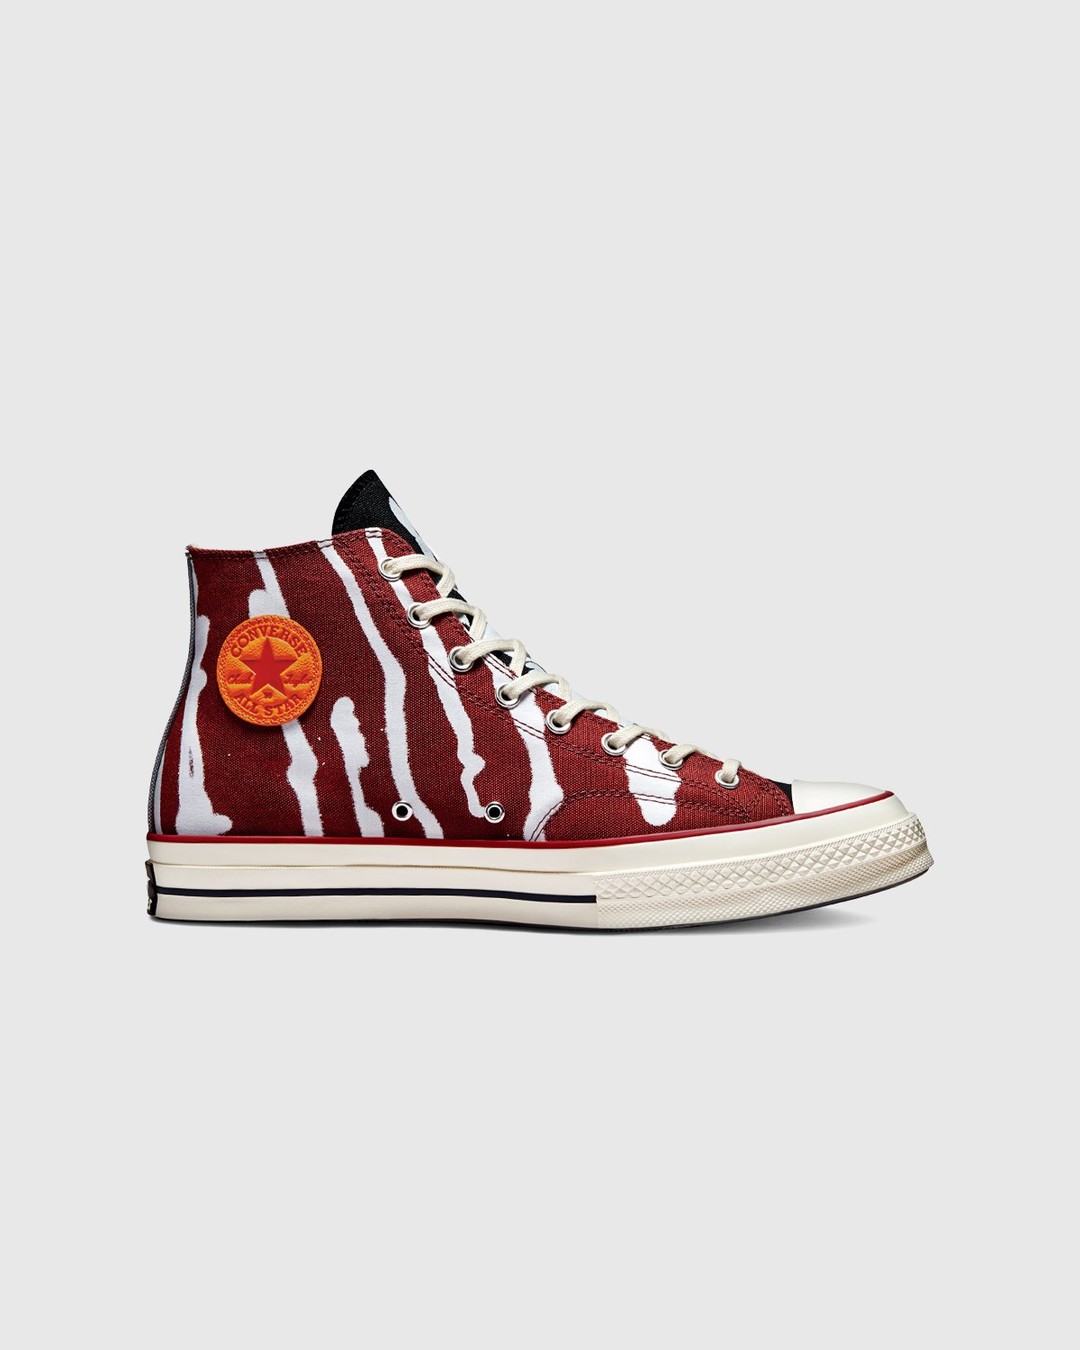 Converse x Come Tees – Chuck 70 Hi White/Multi/Egret - High Top Sneakers - Red - Image 1